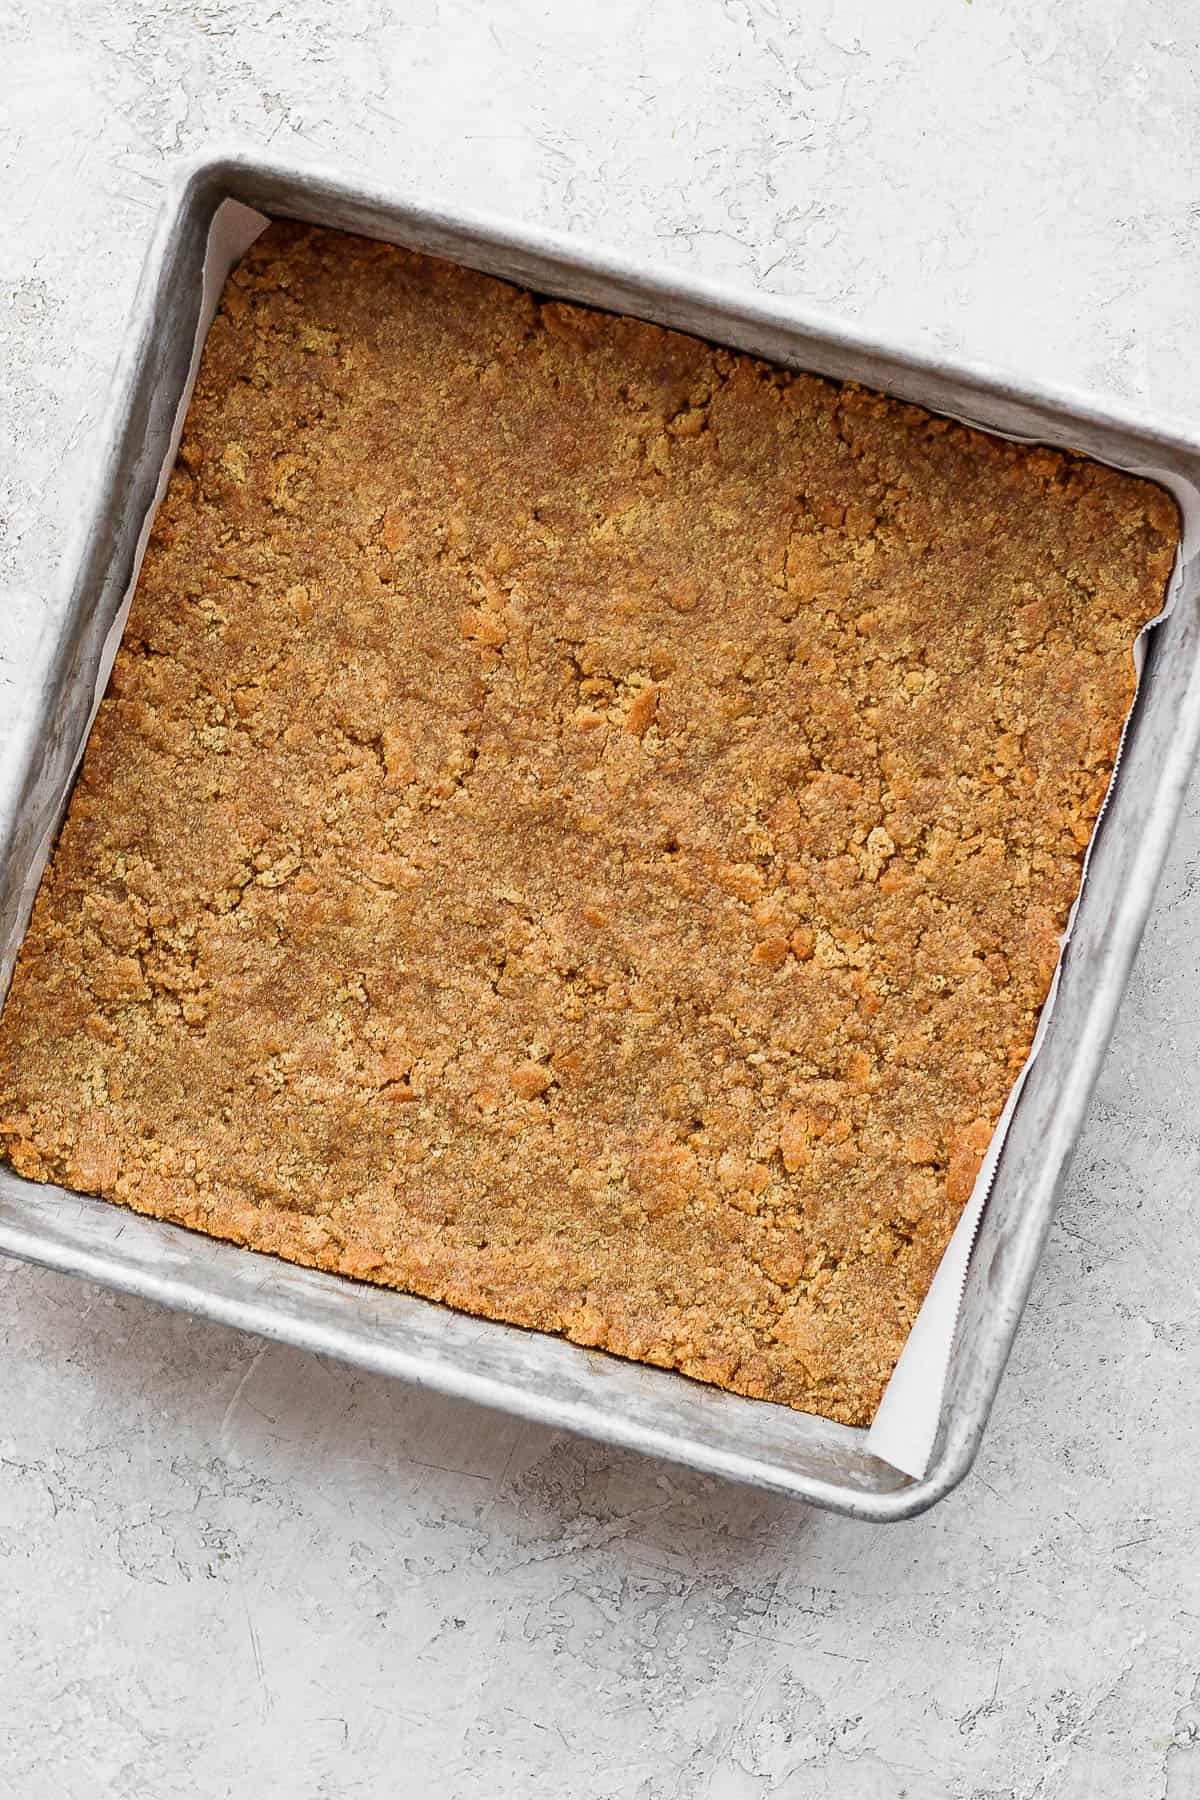 Graham cracker crust pushed into a parchment-lined baking pan.